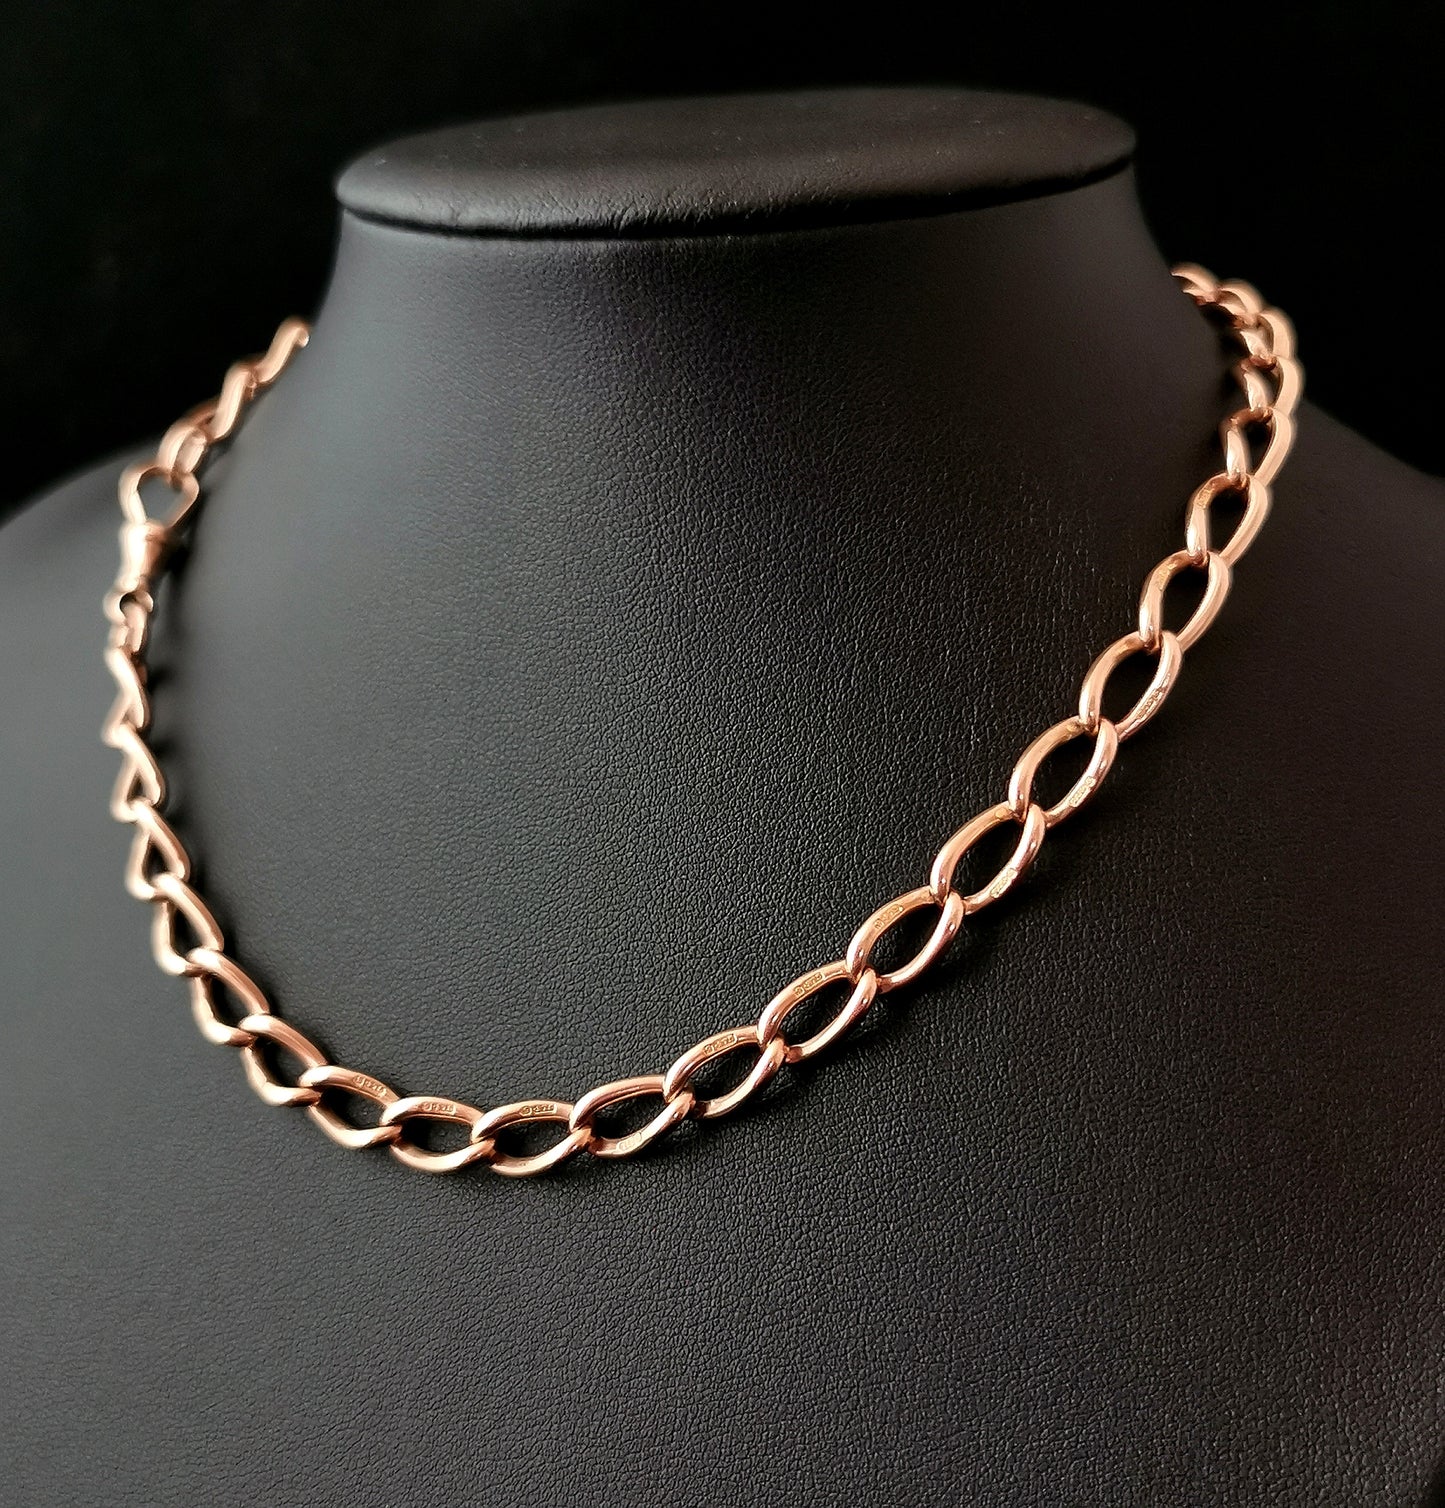 Antique 9ct Rose gold curb link Albert chain, watch chain necklace, Victorian